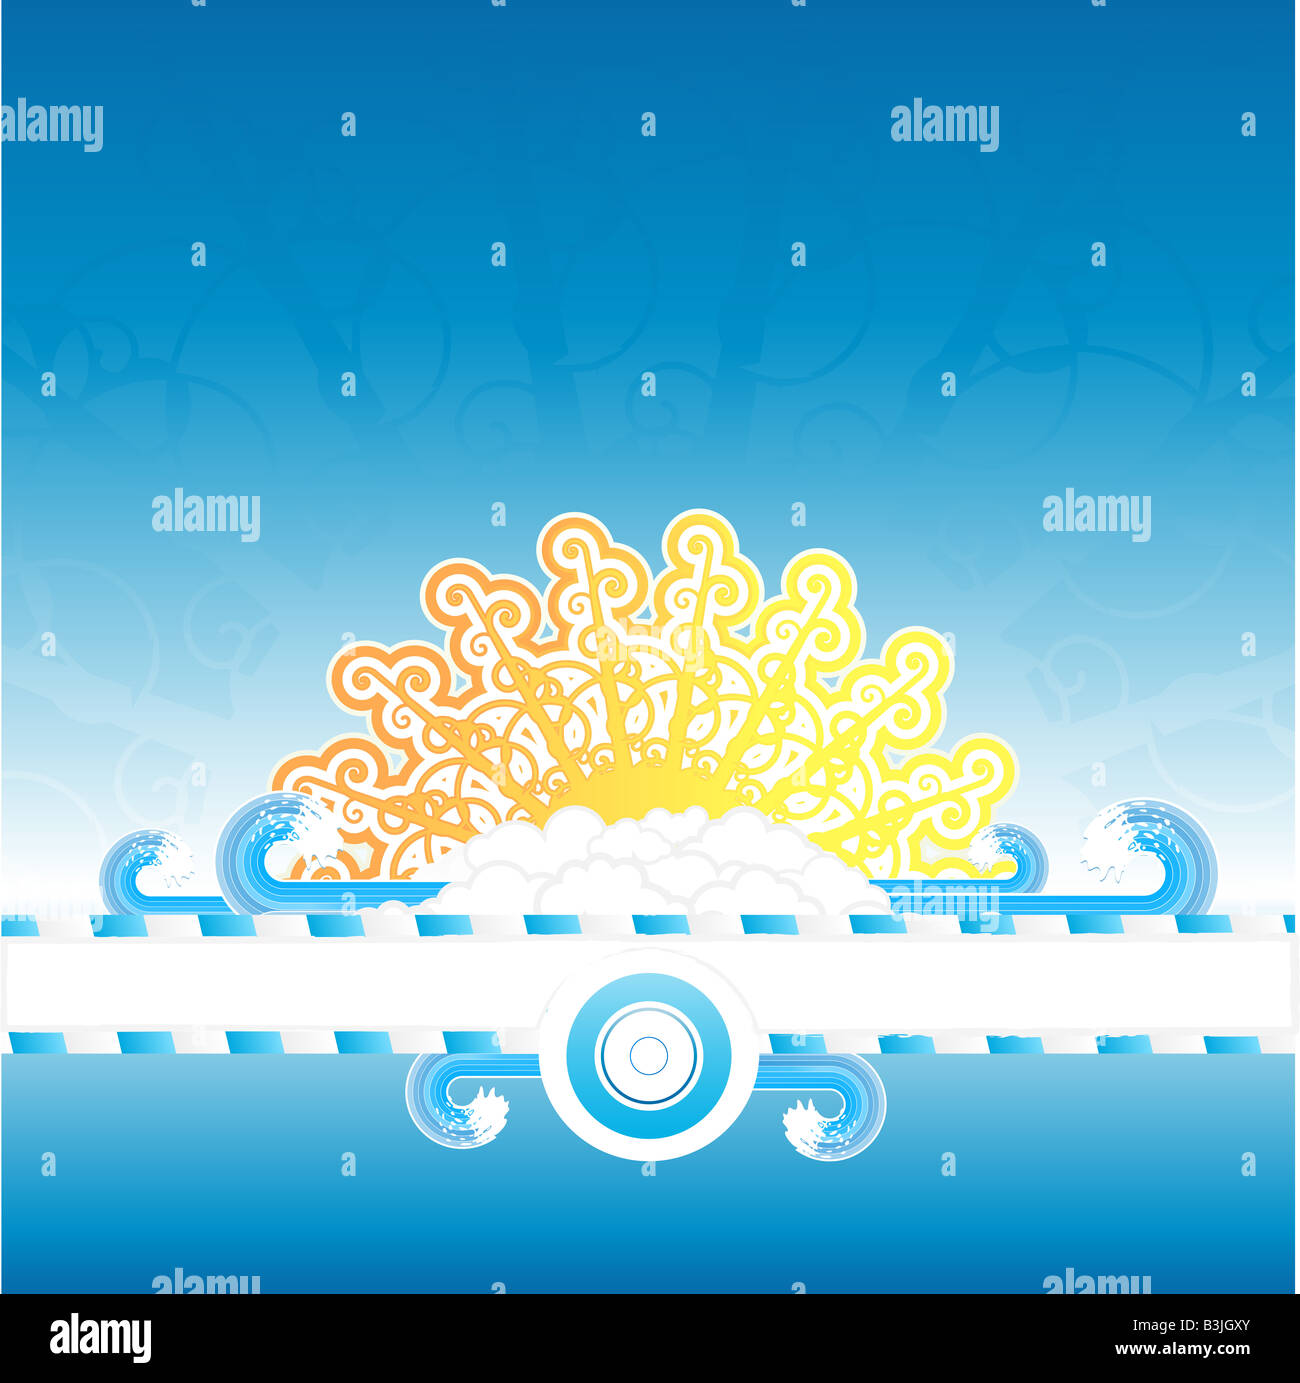 Vector illustration of a multi layered sunny summer background design Stock Photo